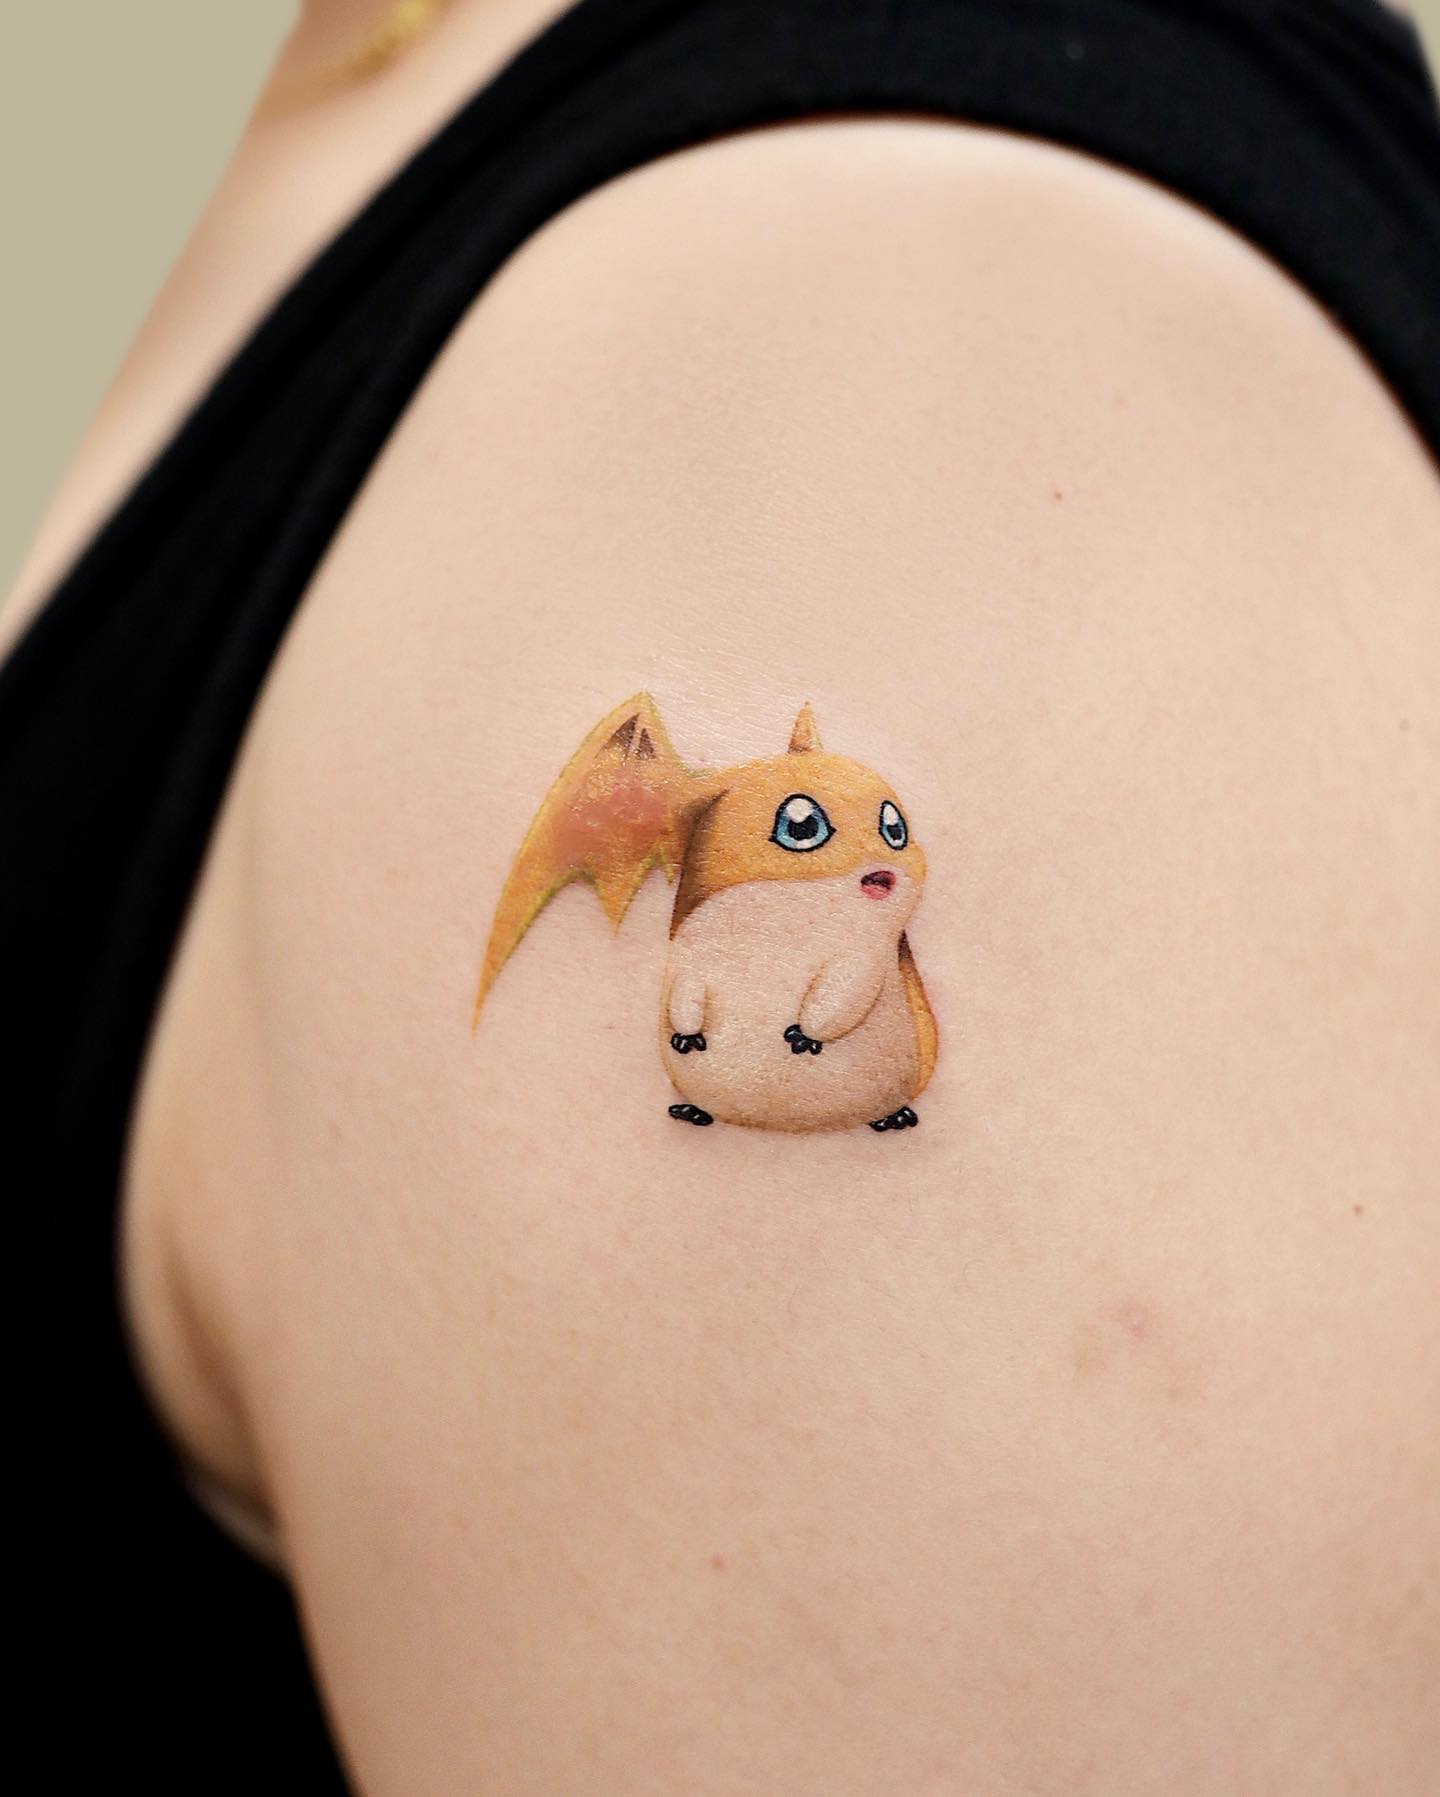 Pin by ♥रveeना♥ on tattoos | Pokemon tattoo, Pikachu tattoo, Pikachu tattoo  design